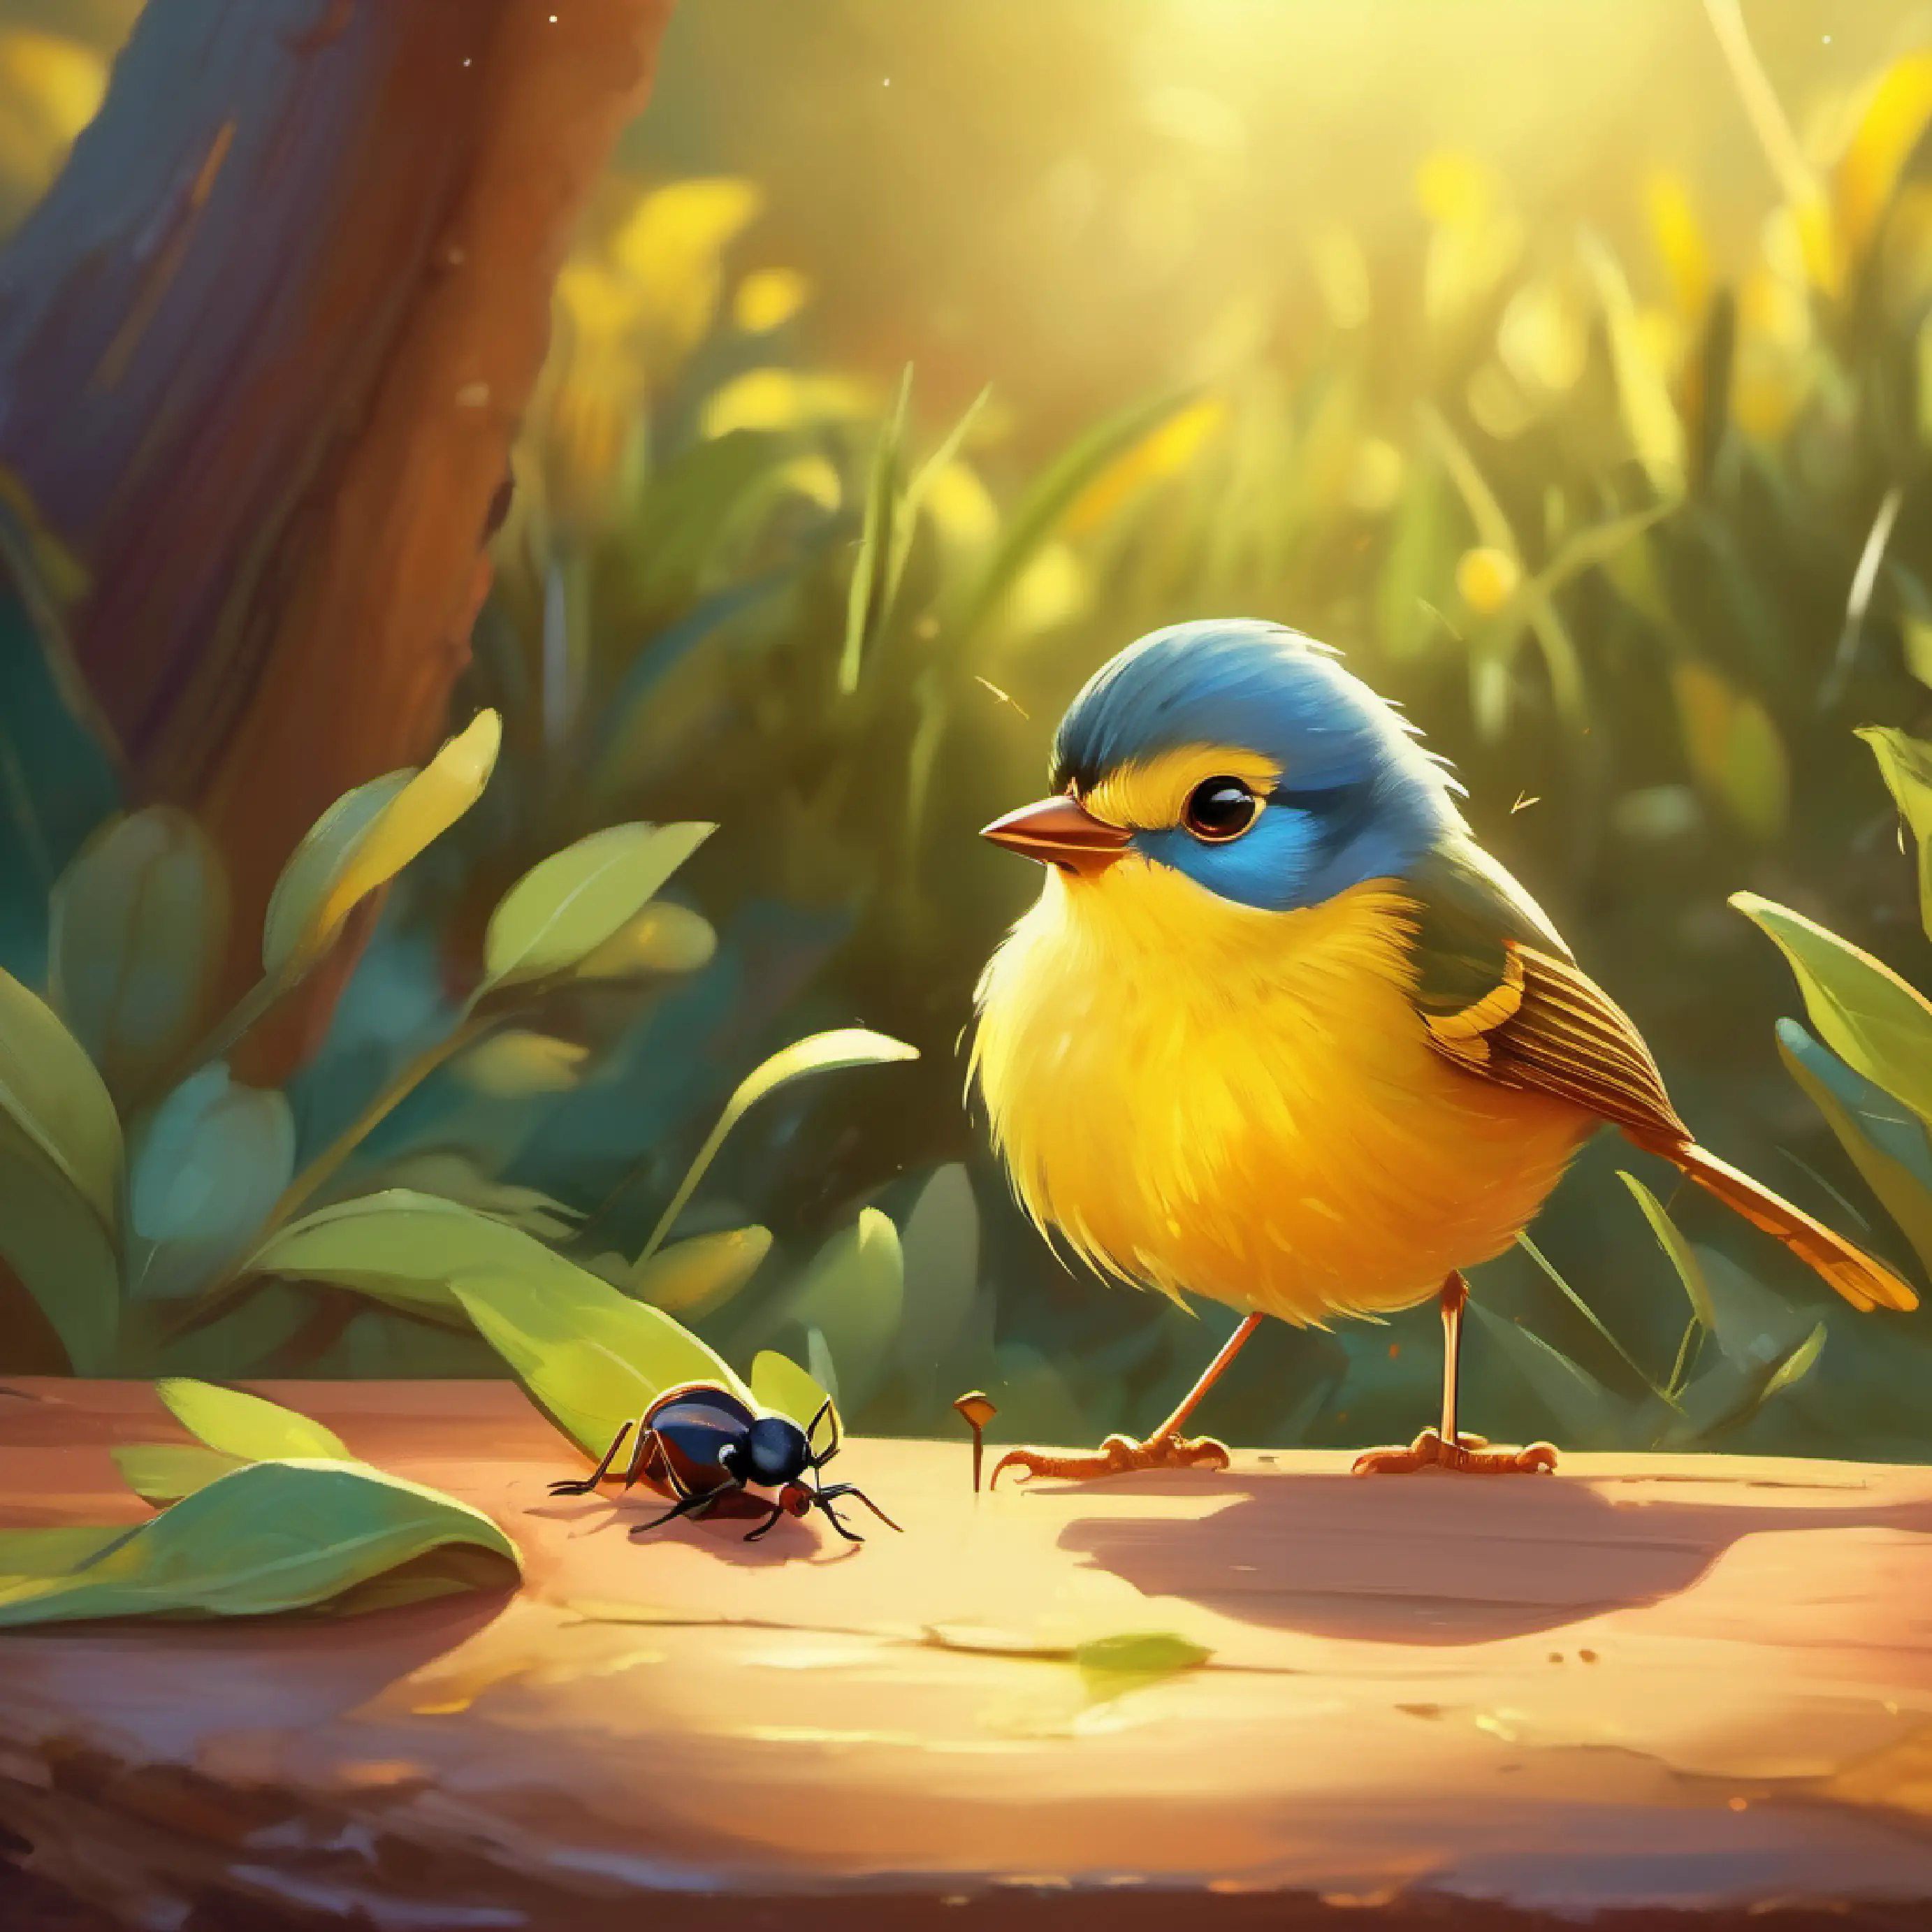 A bright, small bird with yellow feathers and curious eyes shares her food with an ant, explaining the beauty of early mornings.